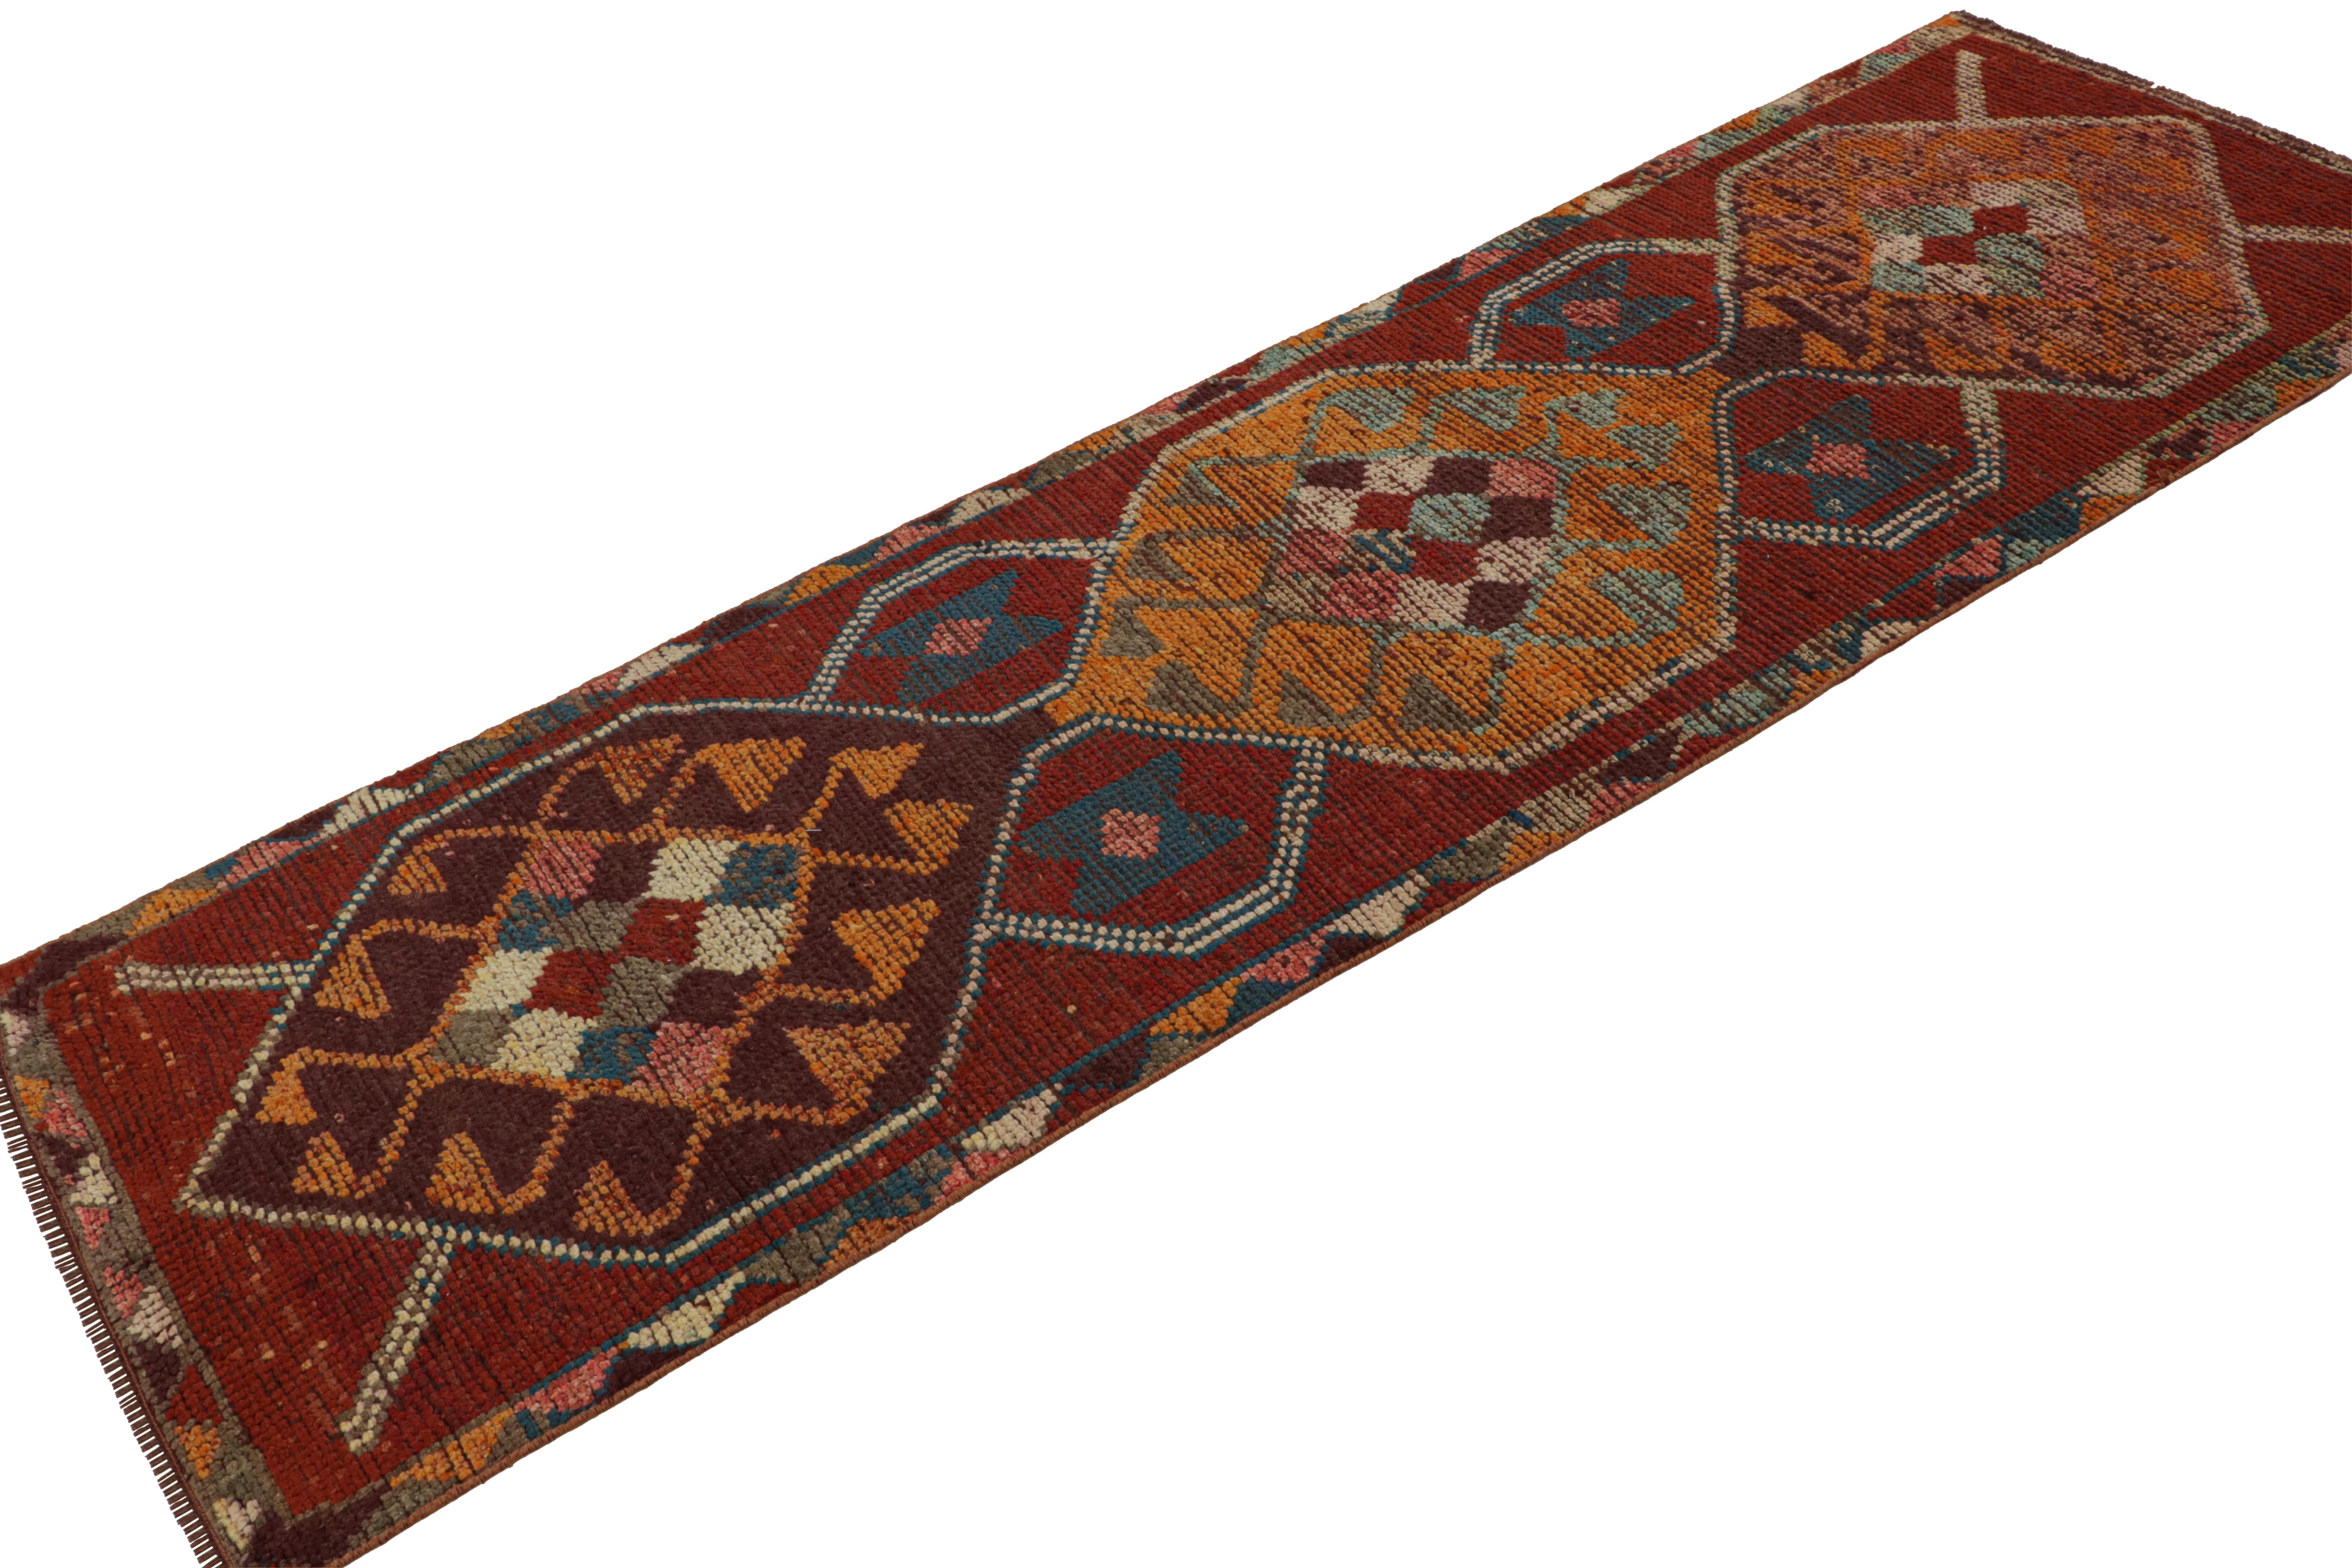 Hand Knotted in wool, this vintage 3x9 Turkish Oushak runner rug in red features a central medallion and geometric patterns in especially rare colors considering its mid-century provenance. 

On the Design: 

Connoisseurs will admire this vintage